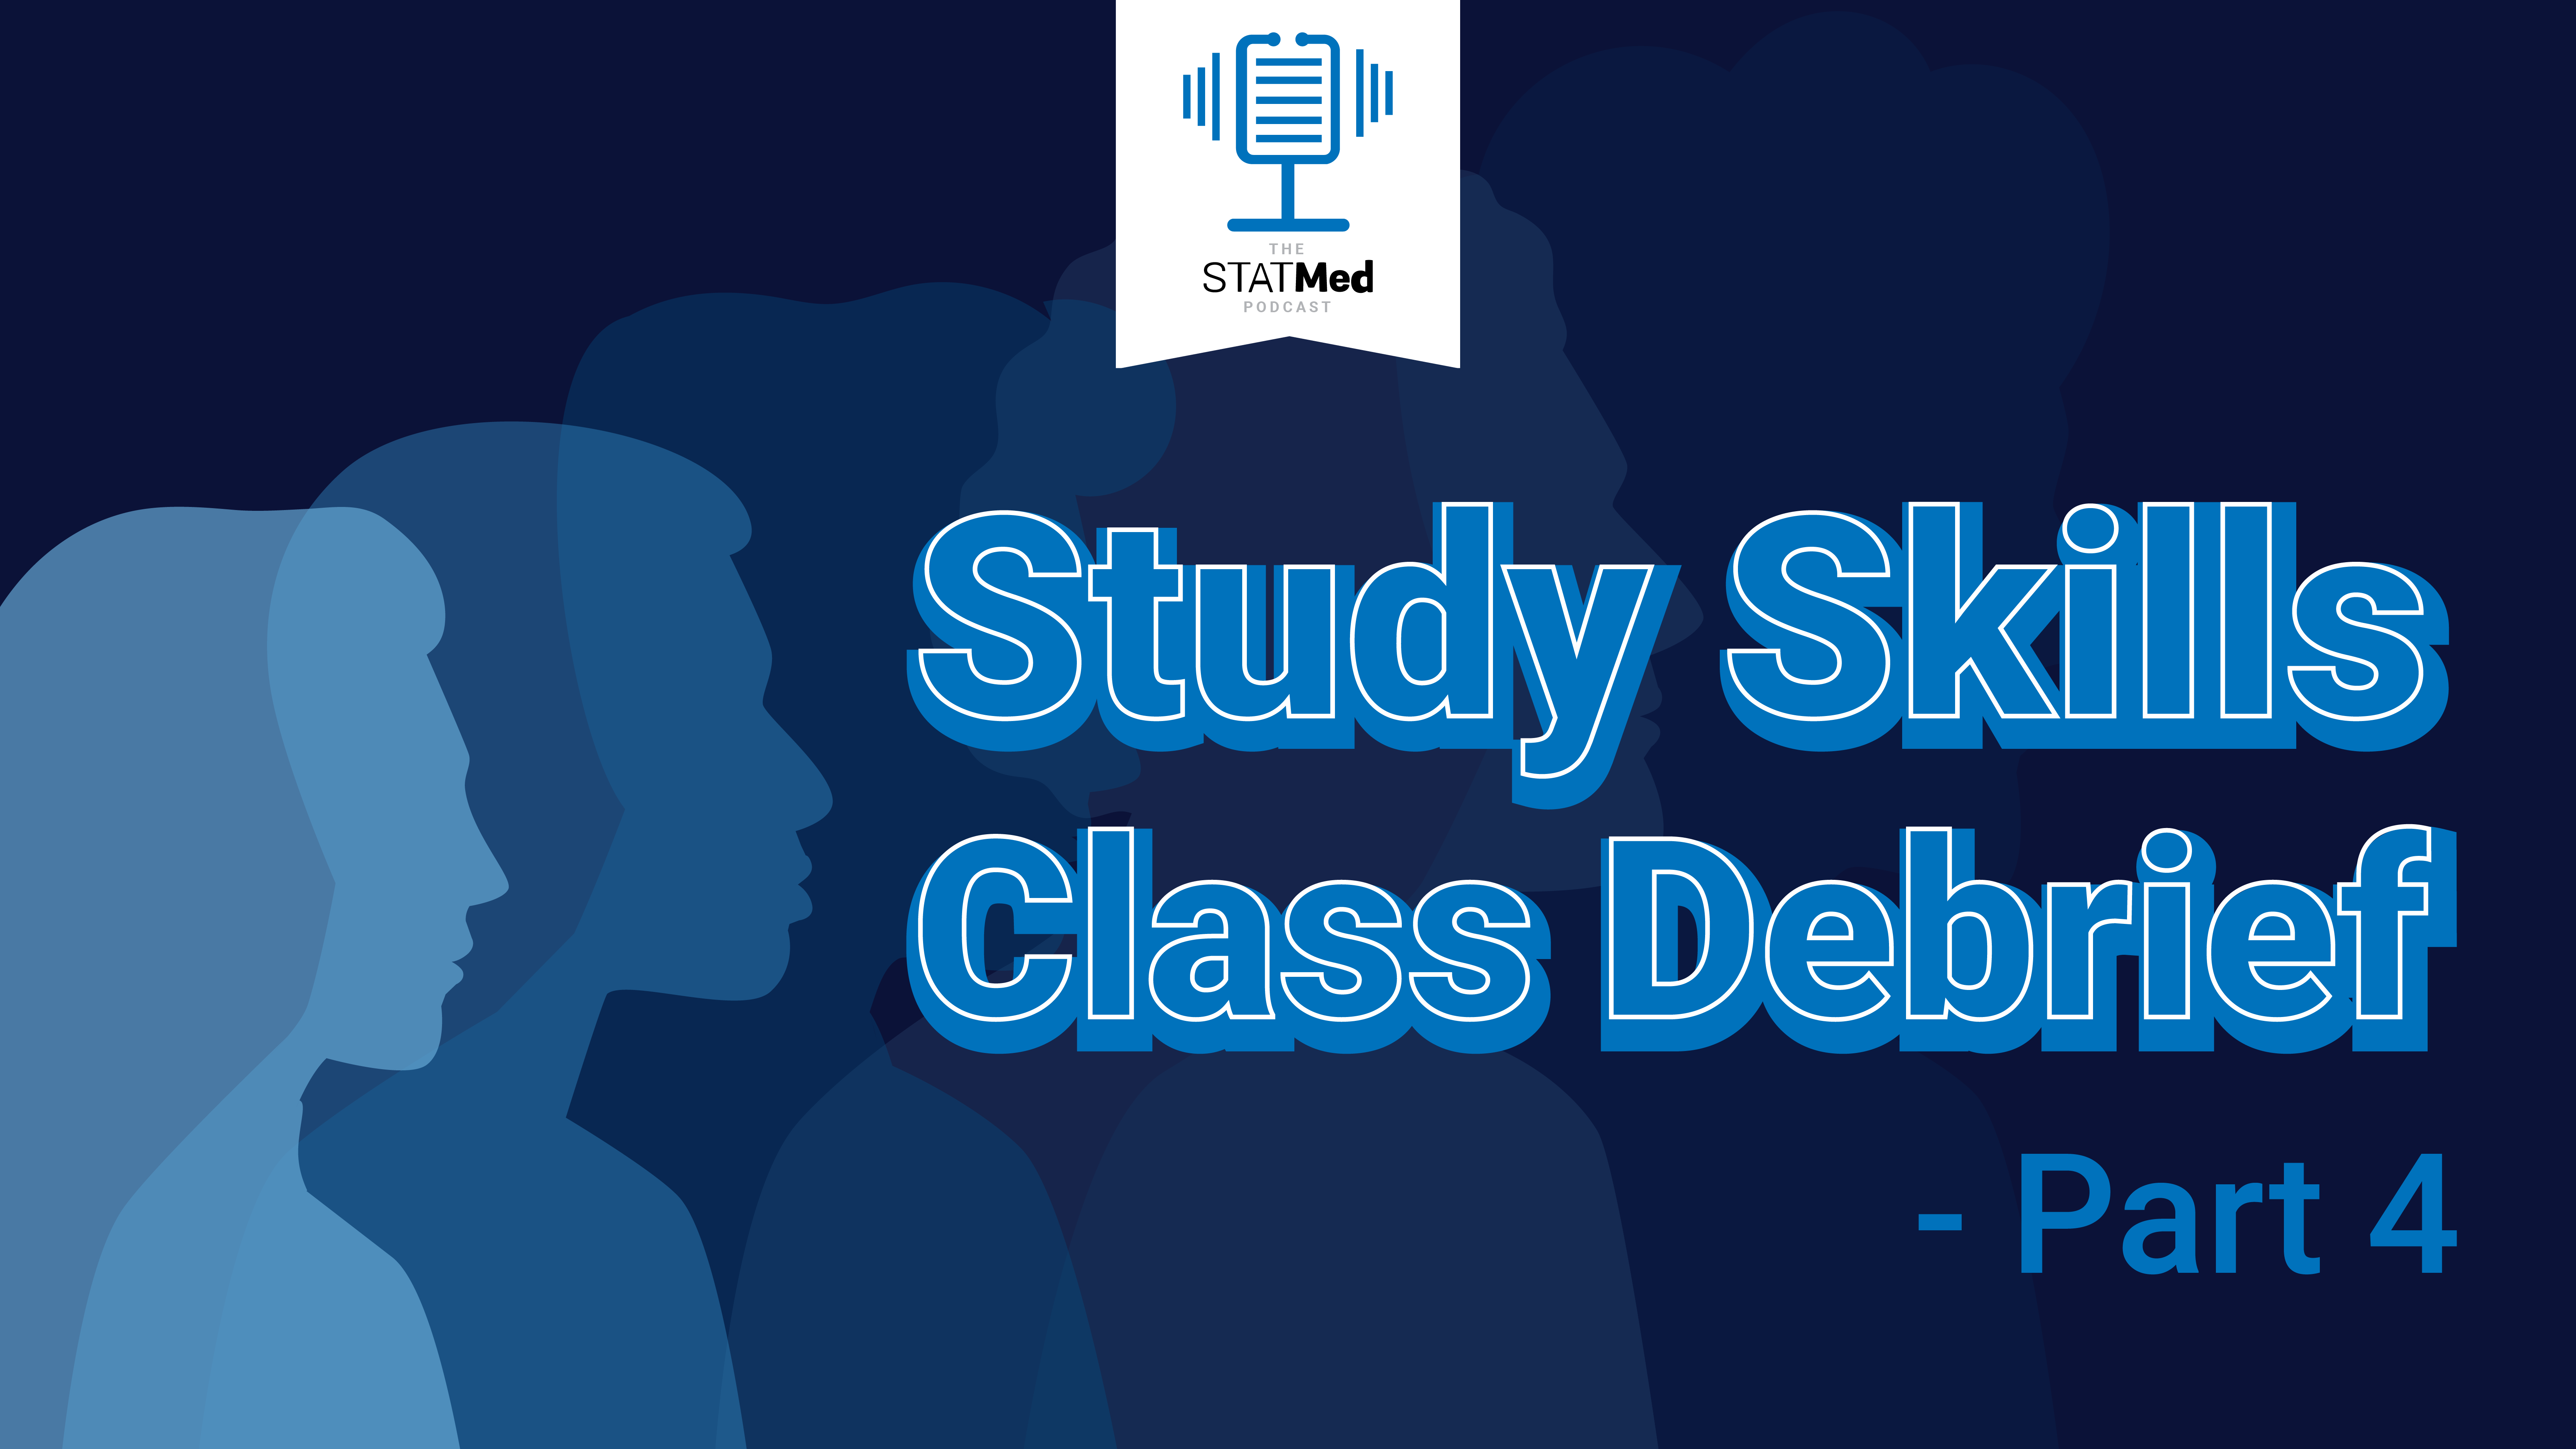 Featured image for “On the STATMed Podcast: Study Skills Class Debrief Part 4”